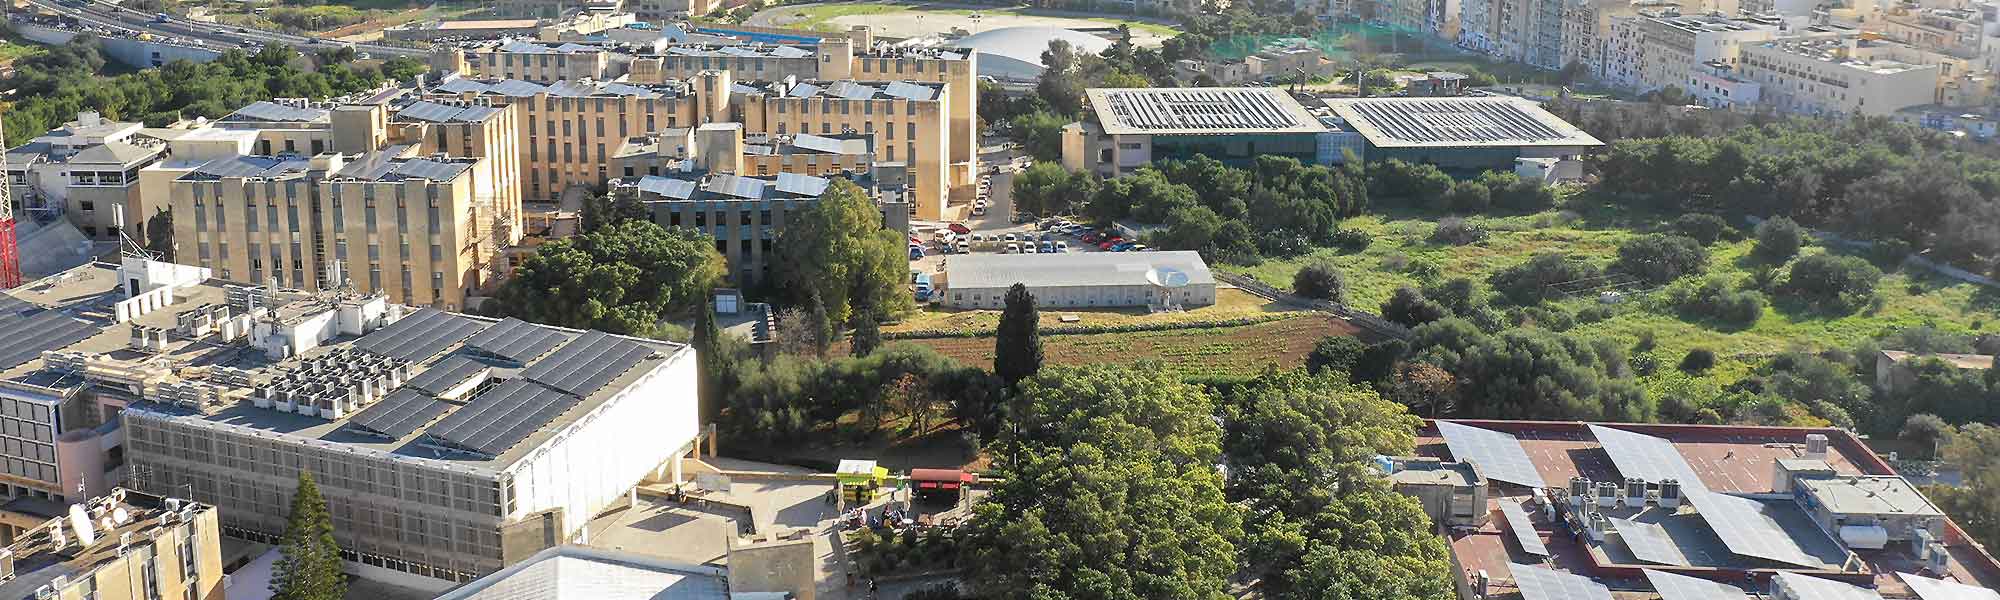 Aerial view of the University Msida campus showing photovoltaic panels on the various buildings